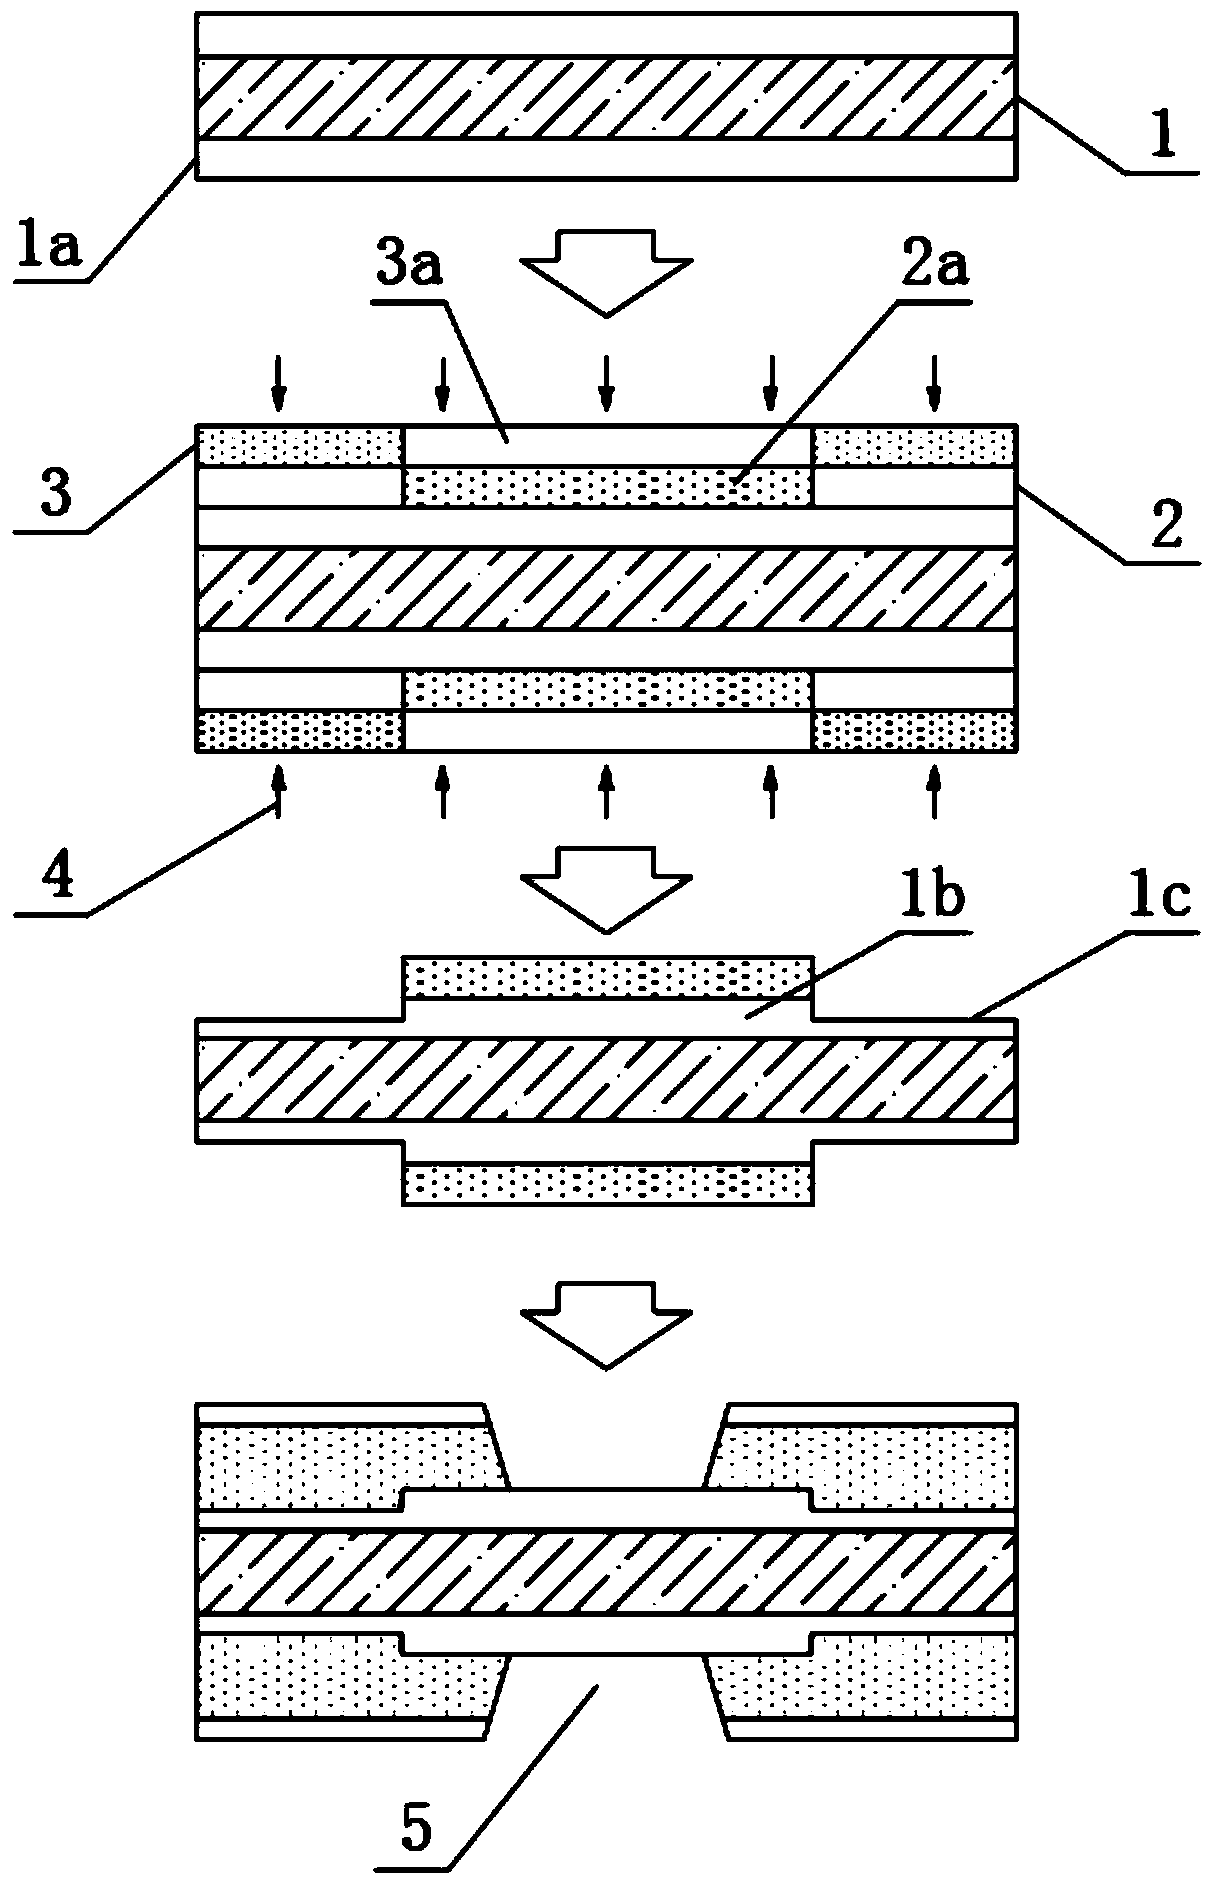 Laser drilling plate machining method adopting secondary outer-layer core material for reducing copper